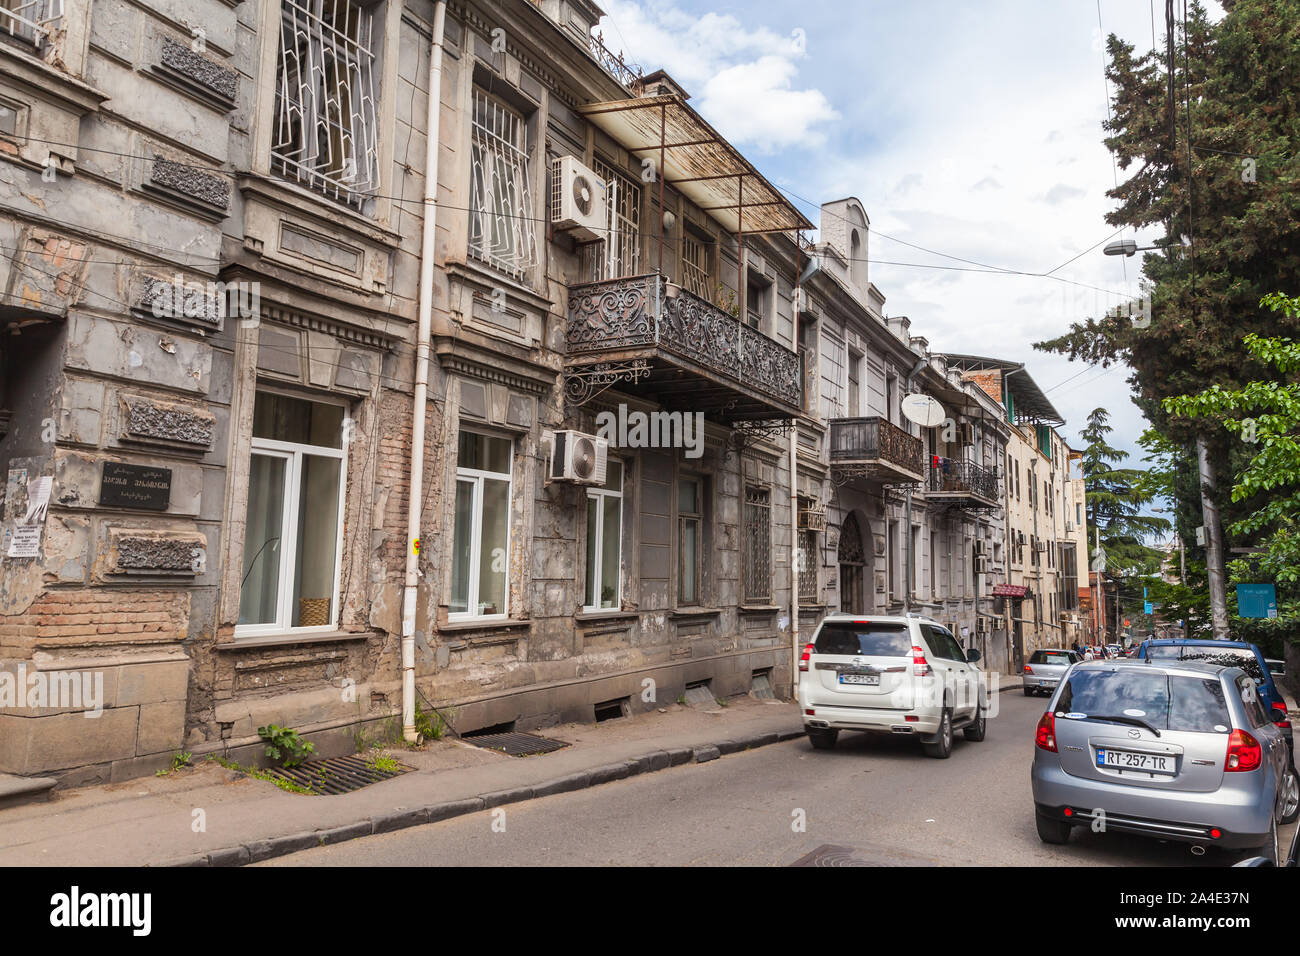 Tbilisi, Georgia - May 03, 2019: Tbilisi old street view with cars parked near living houses with traditional wooden balconies Stock Photo